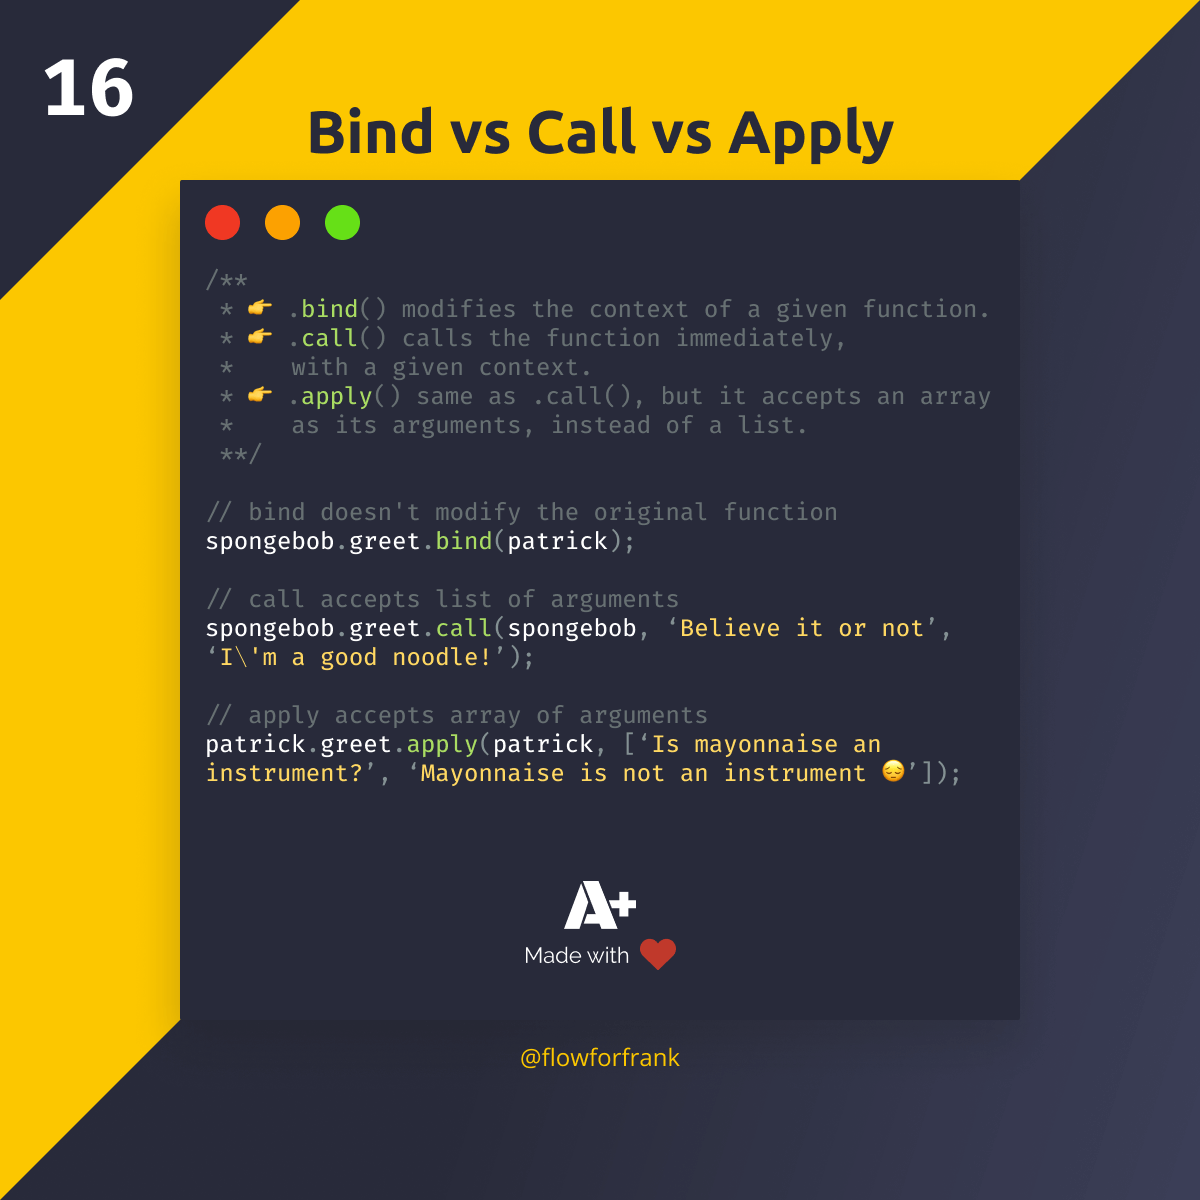 What is the difference between event bind, call and apply?